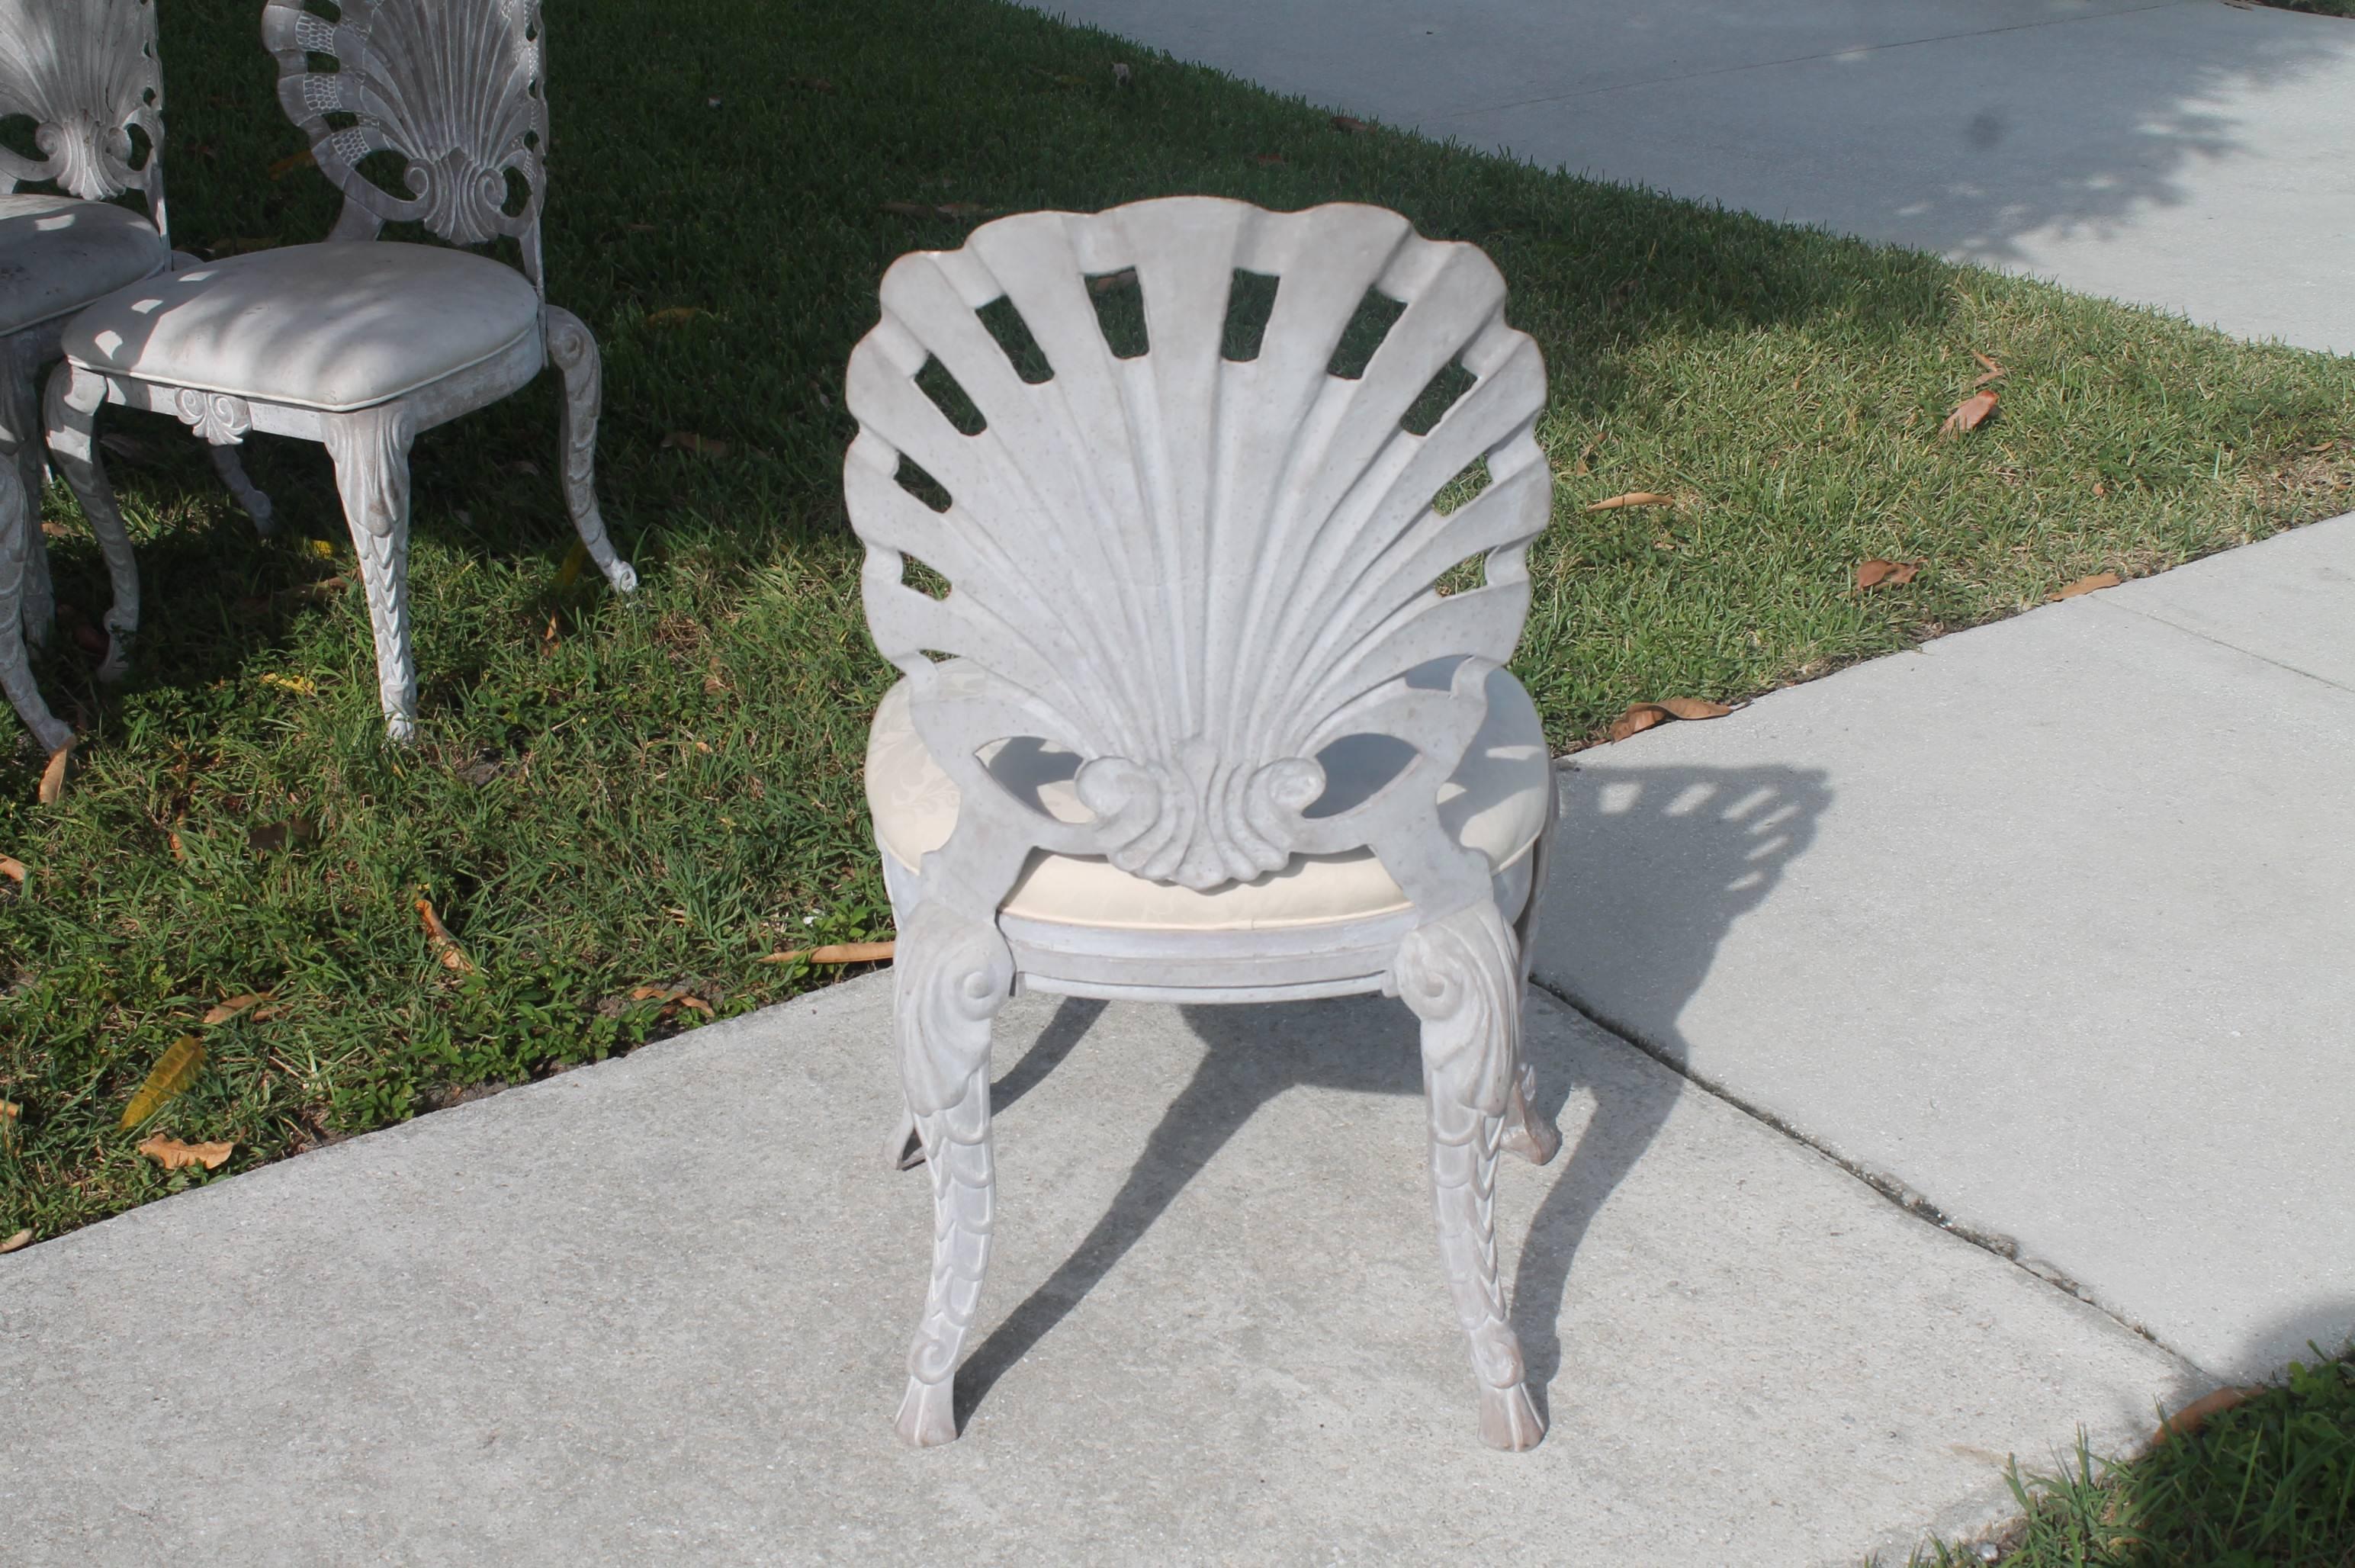 shell back dining chair